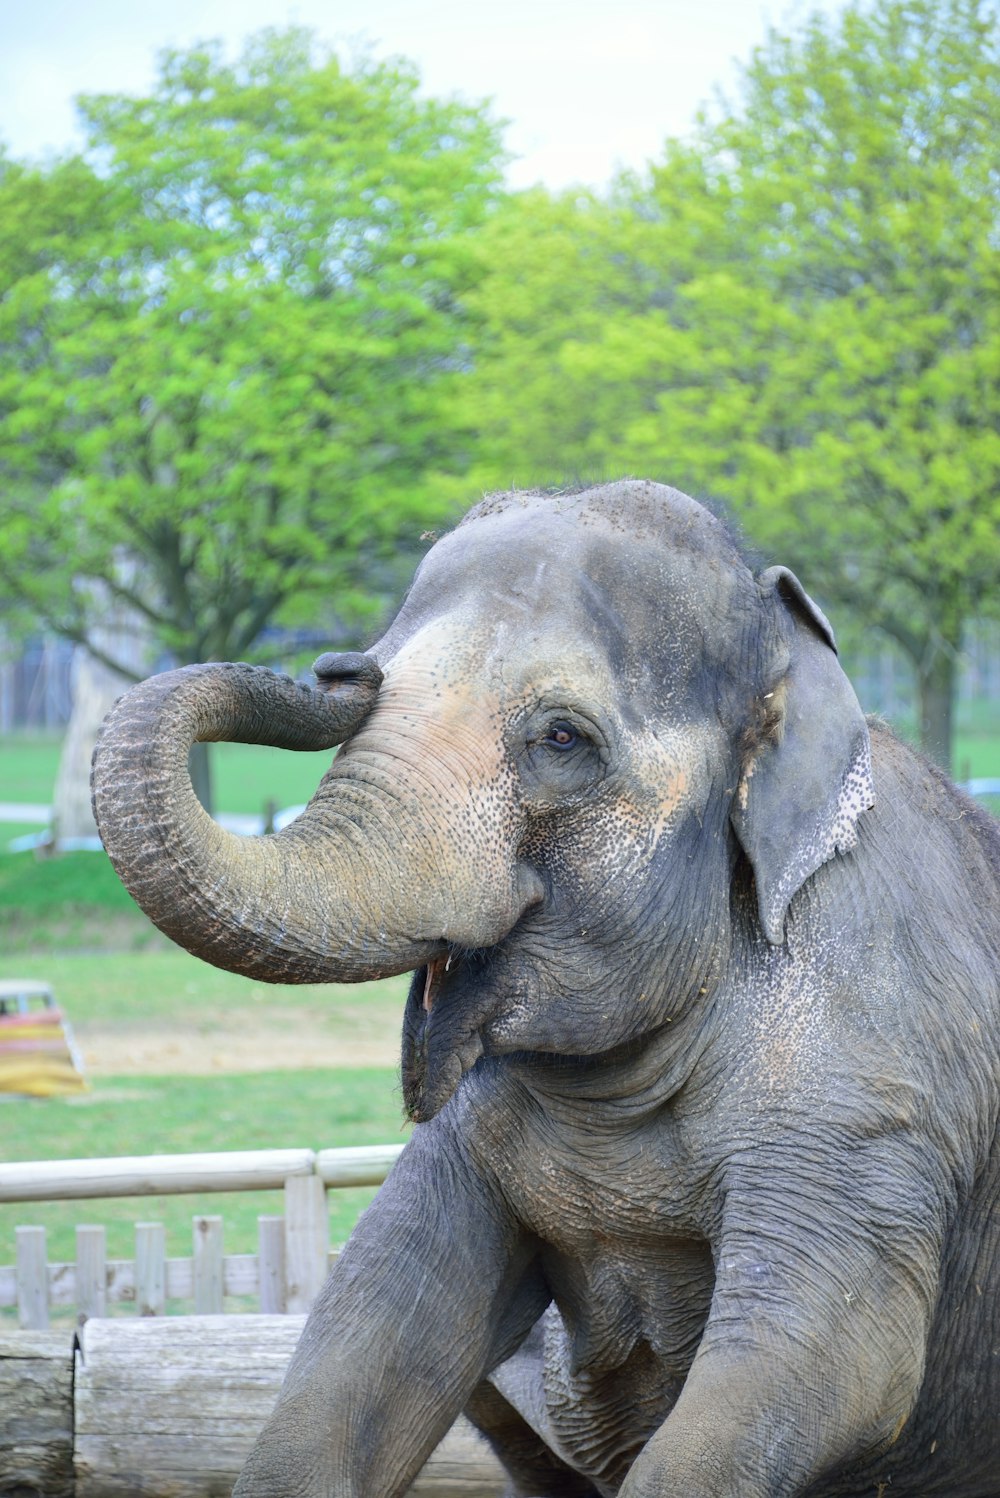 gray and brown elephant during daytime